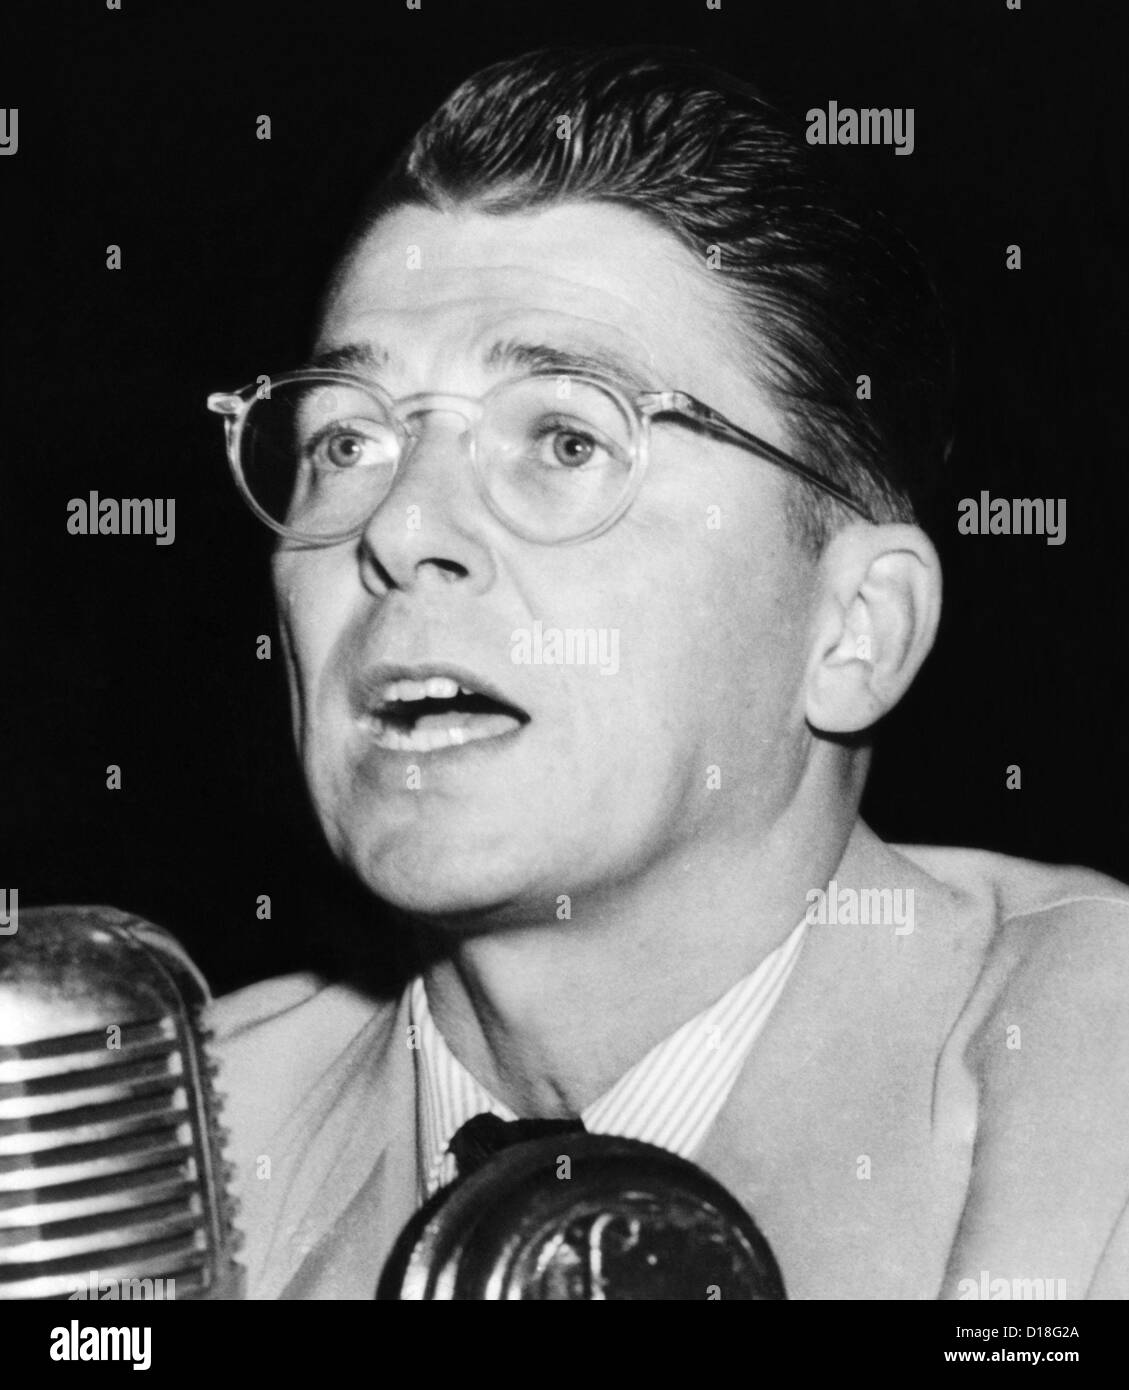 Actor Ronald Reagan testified to HUAC about the influence of Communist subversives within the motion picture industry. Reagan Stock Photo